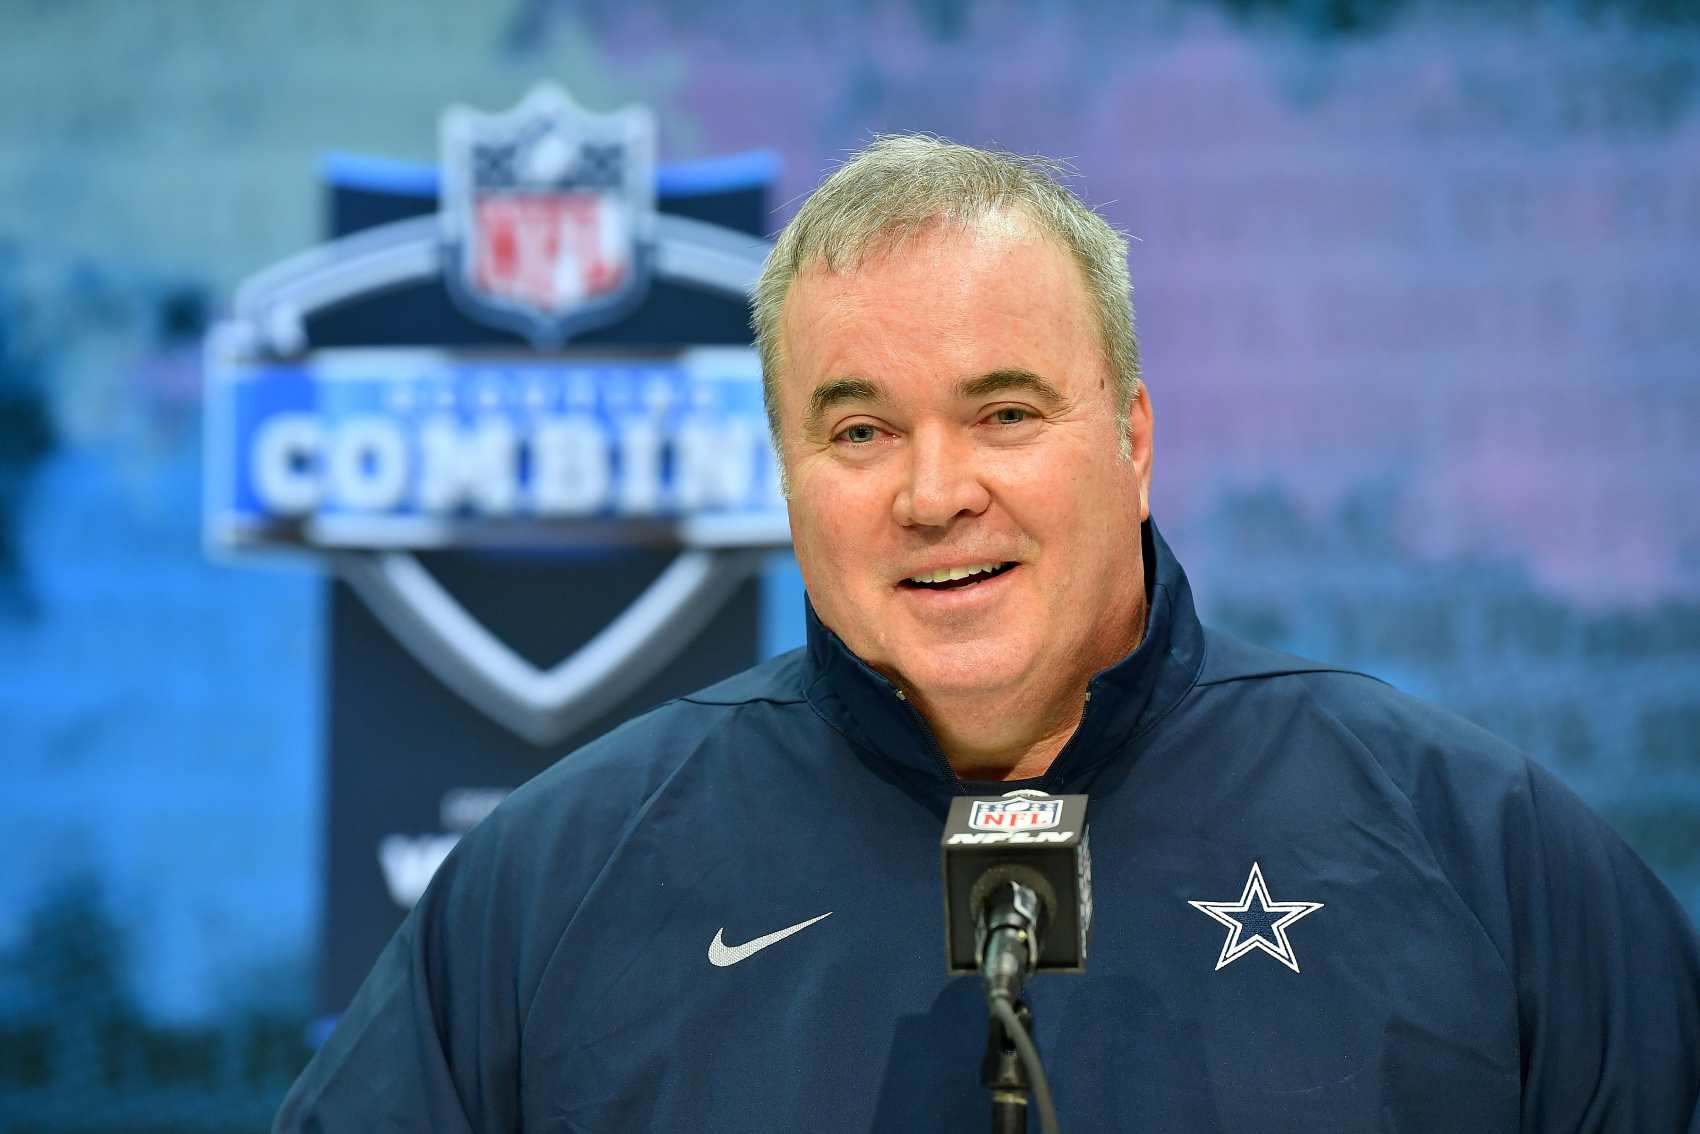 Being the coach of the Cowboys, there is a lot of pressure on Mike McCarthy. However, he just did his best impression of Bill Belichick.